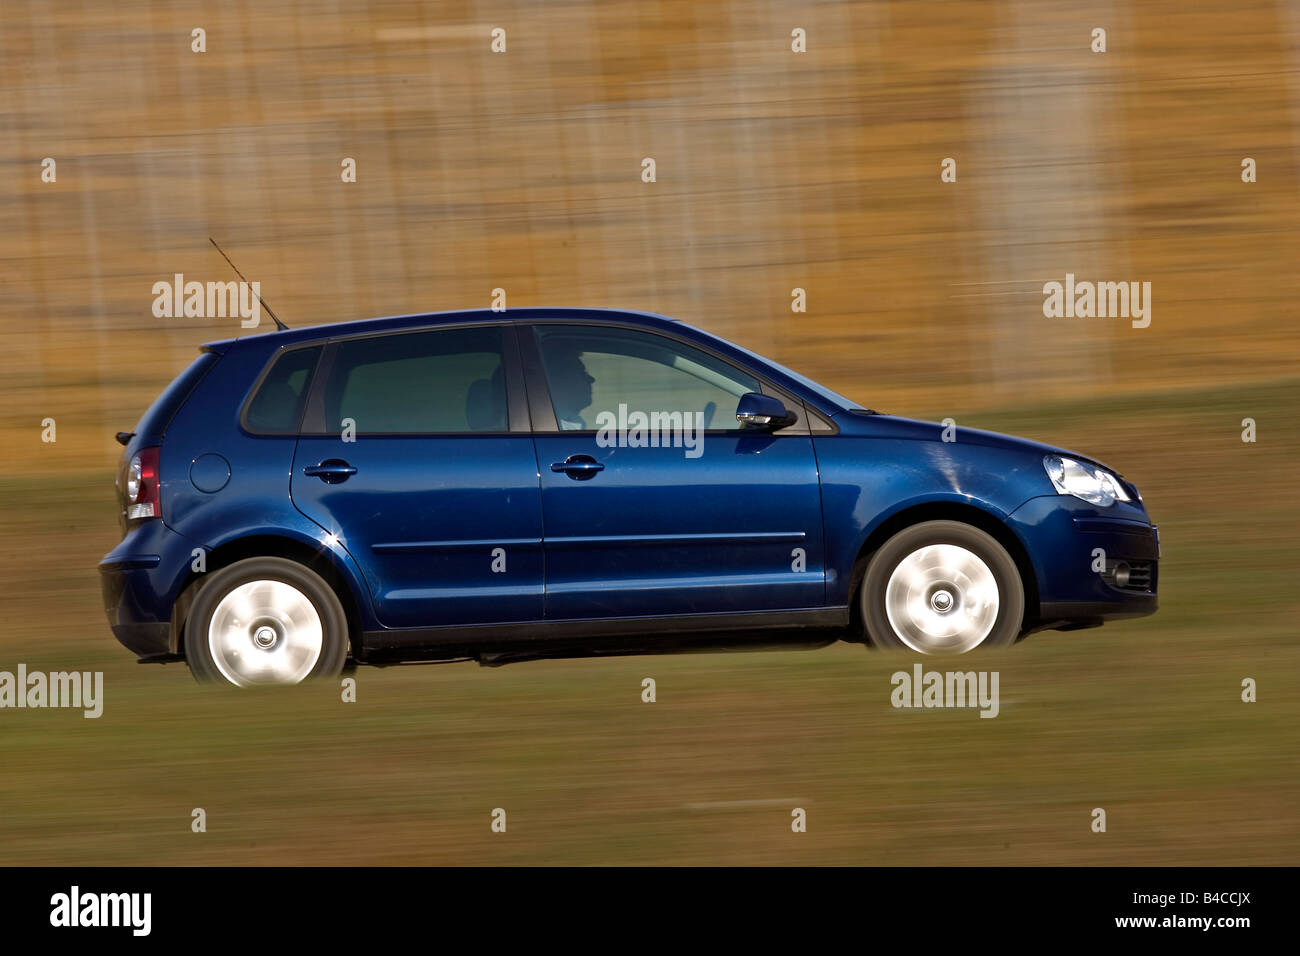 Car, VW Volkswagen Polo 1.9 TDI, model year 2005-, dark blue, small  approx., Limousine, driving, side view, country road, photog Stock Photo -  Alamy